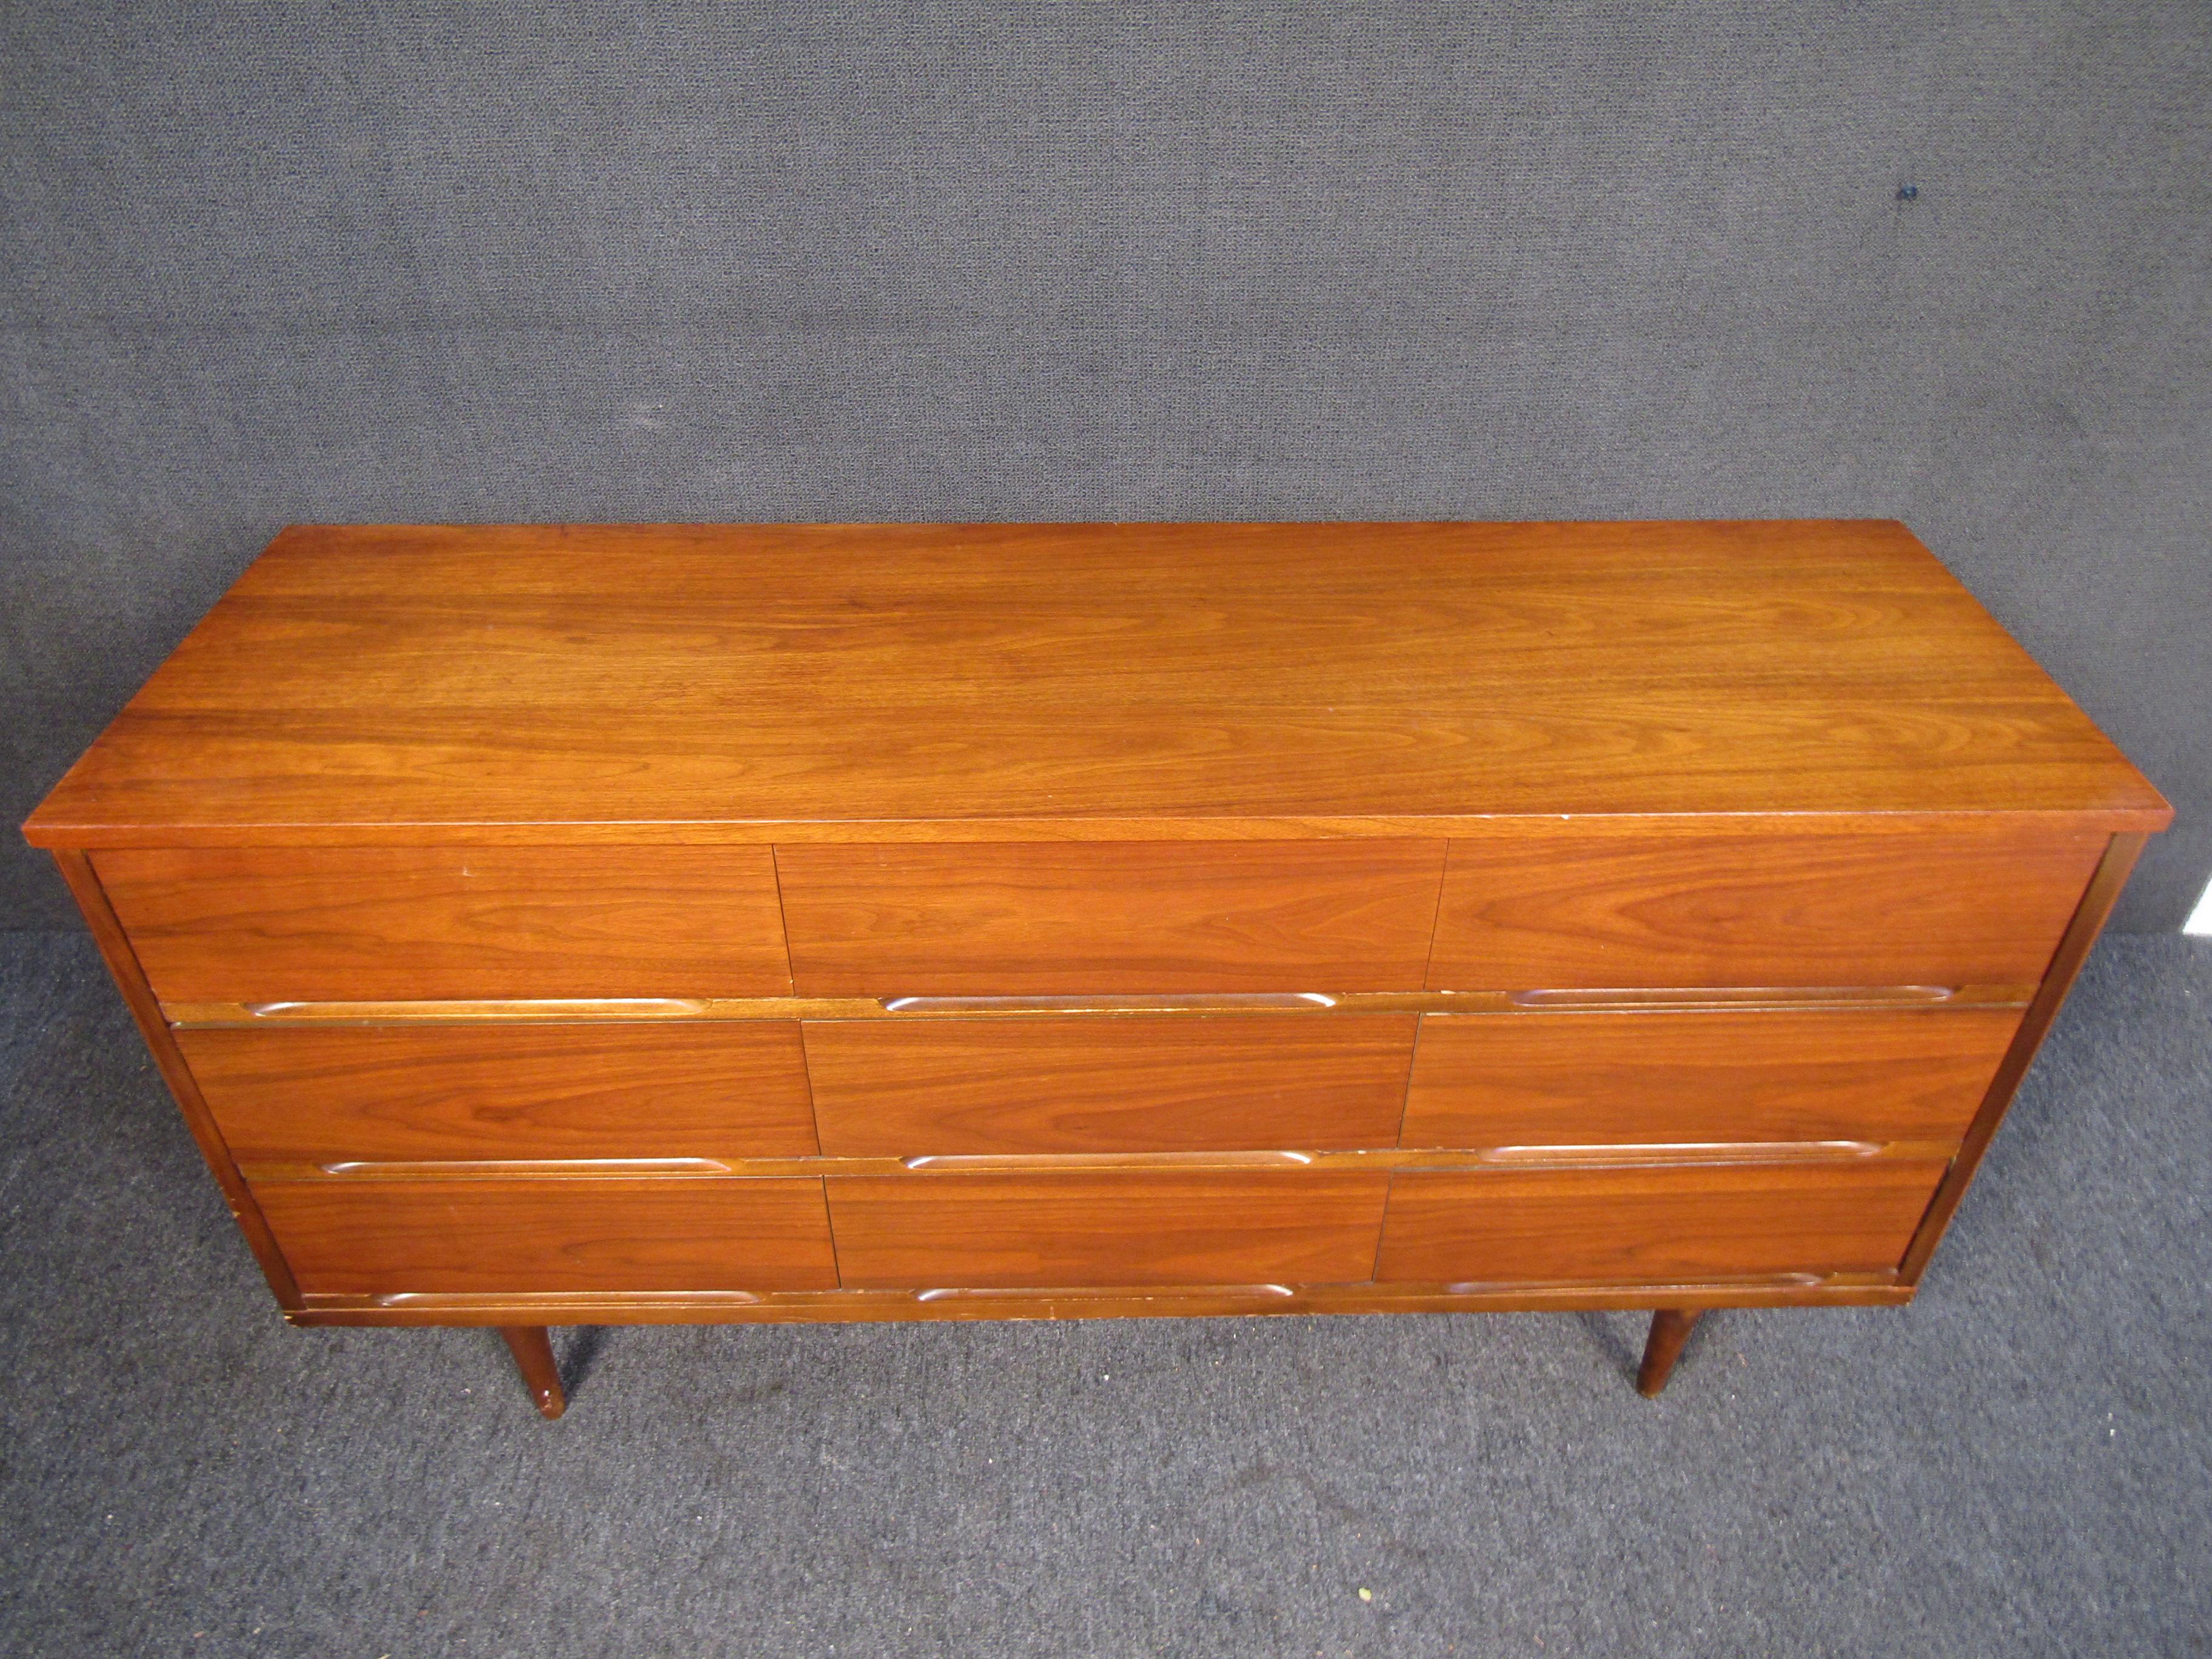 Mid-Century Modern walnut dresser with nine drawers. Features wood inset handles and tapered legs. If you are looking to furnish your bedroom with a vintage piece this would be a perfect addition.

Please confirm item location (NJ or NY).